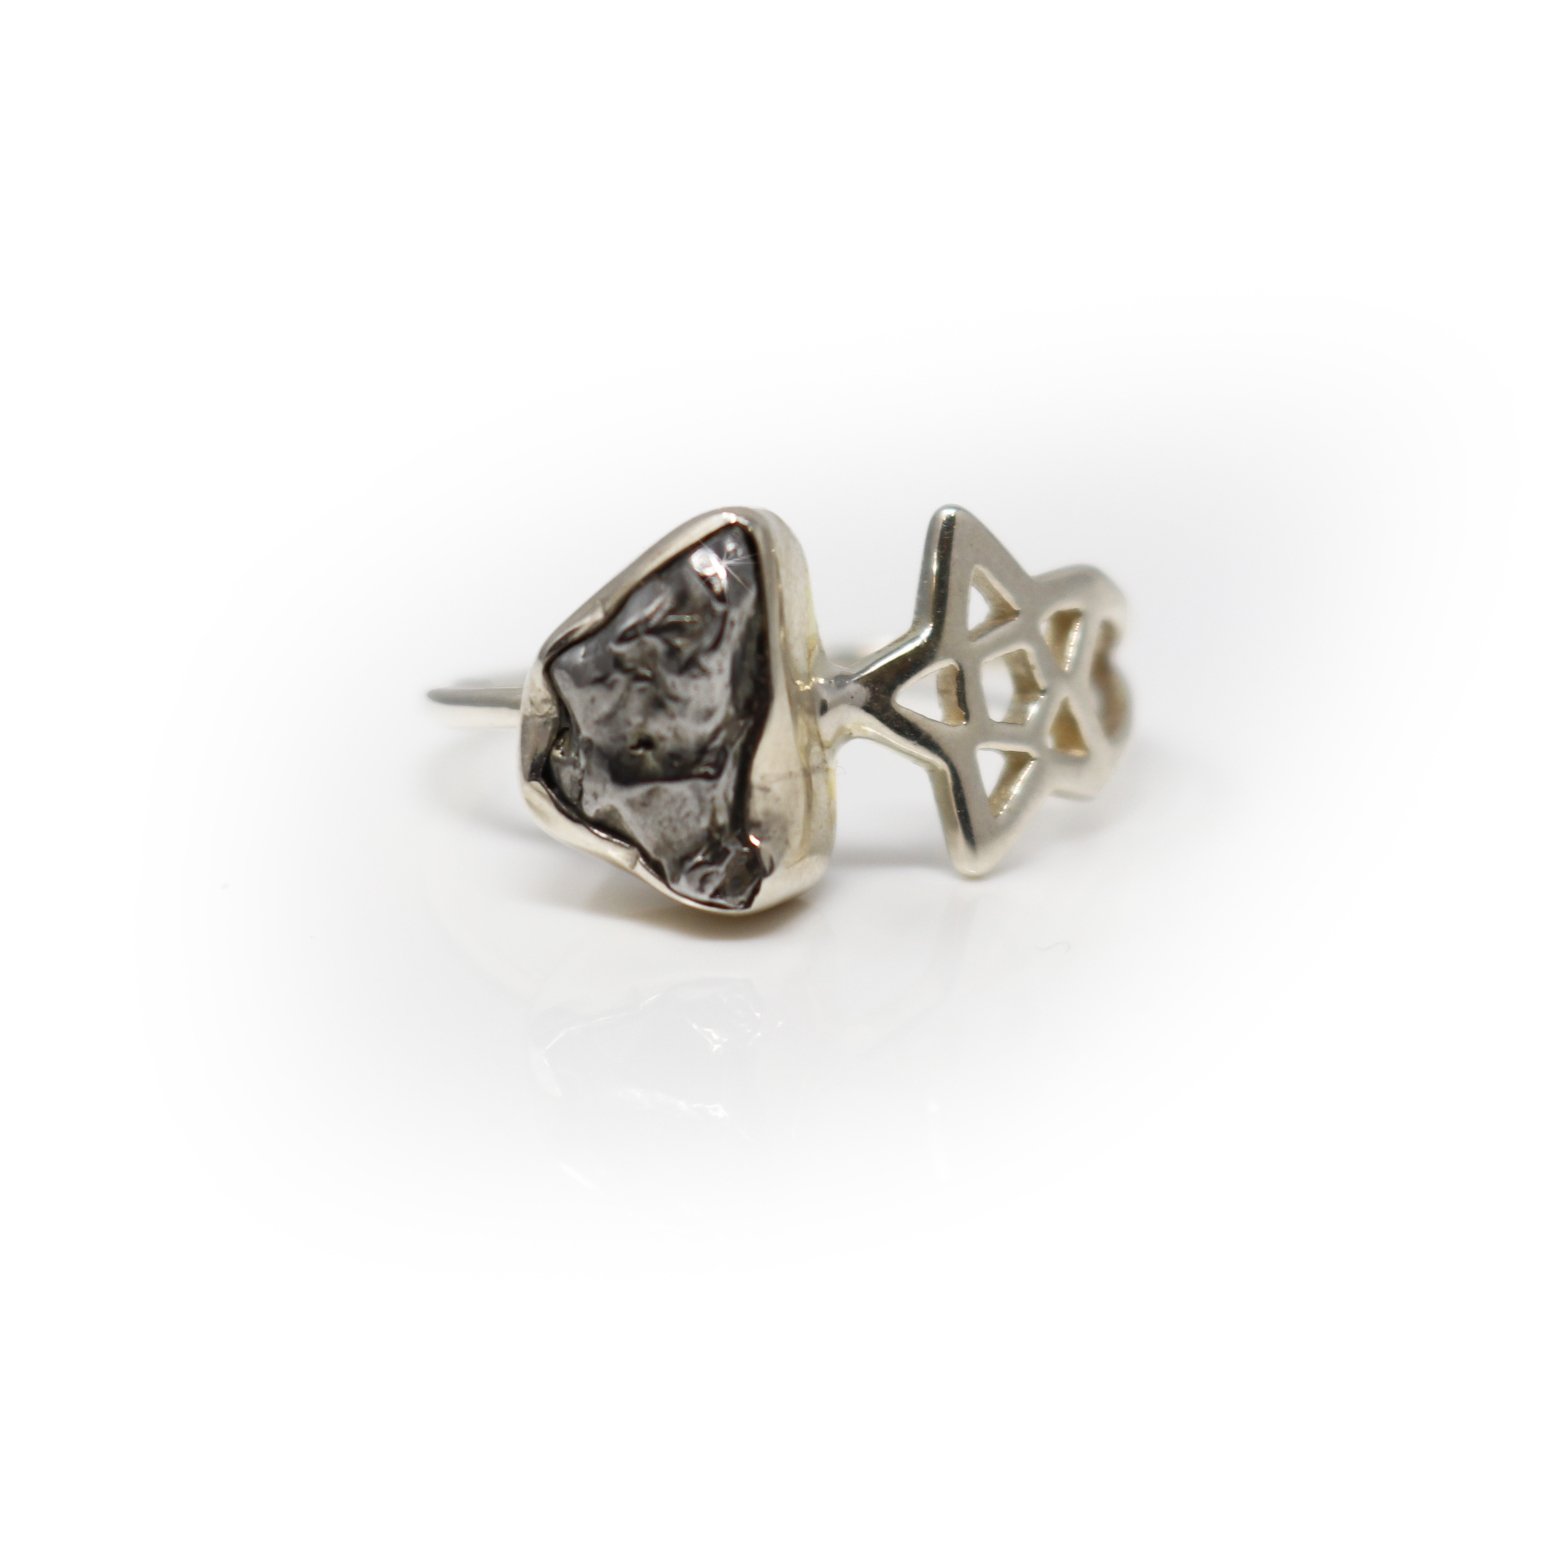 Campo De Cielo Meteorite Ring - Rough Freeform With 925 Sterling Silver Bezel & Star On Band Sz9